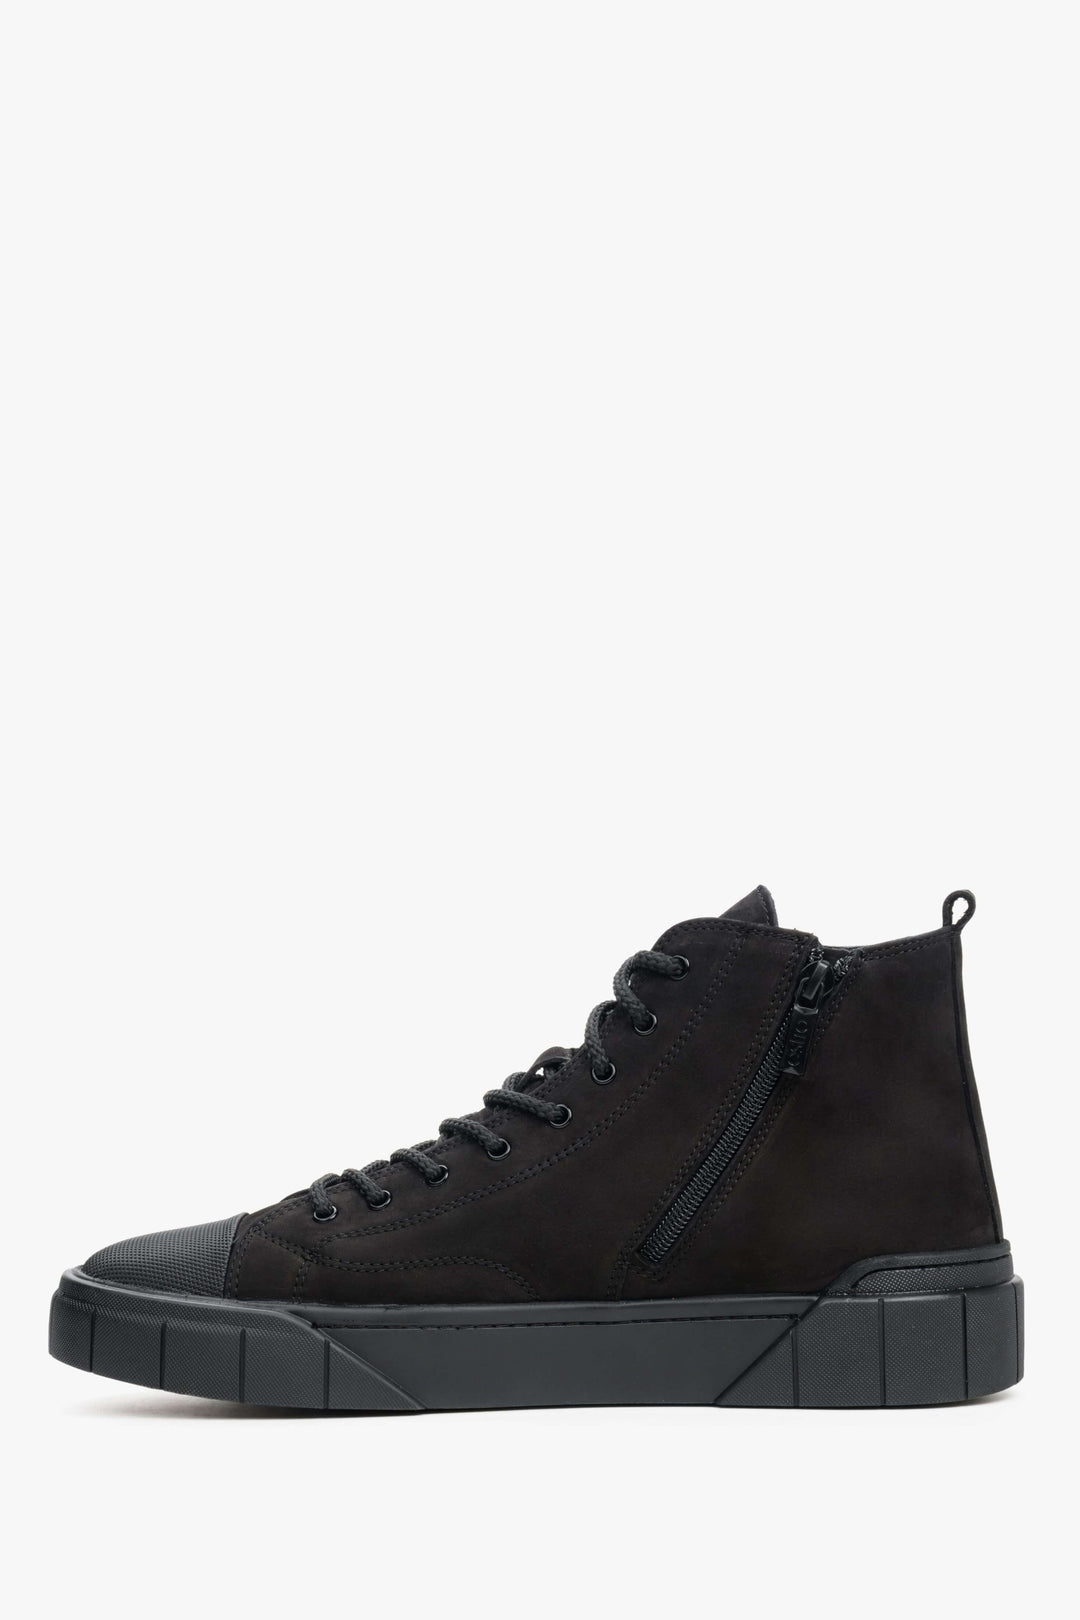 High-top men's lace-up sneakers in black by Estro - shoe profile.